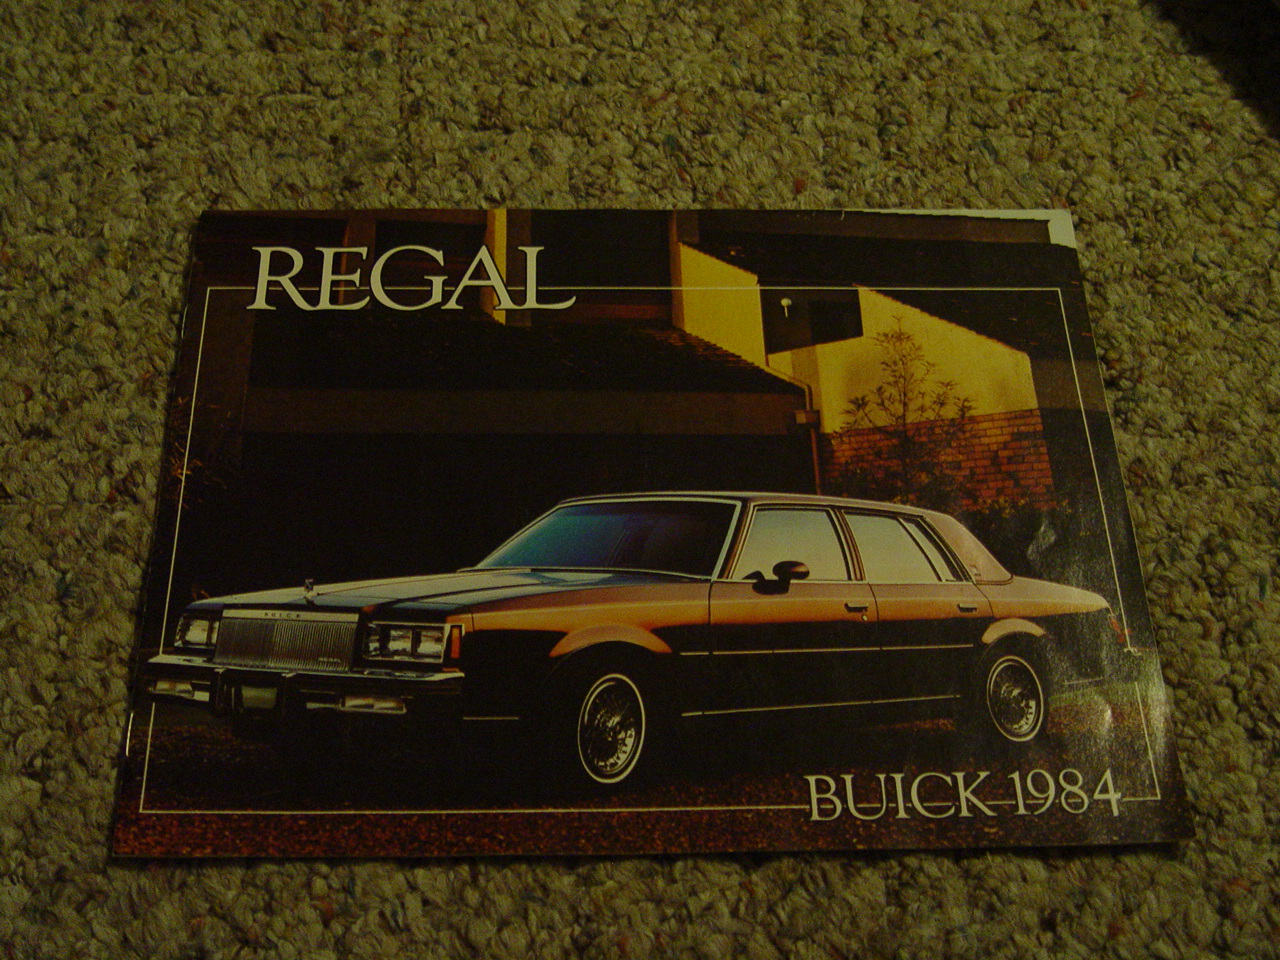 1984 Buick Buyers Guide